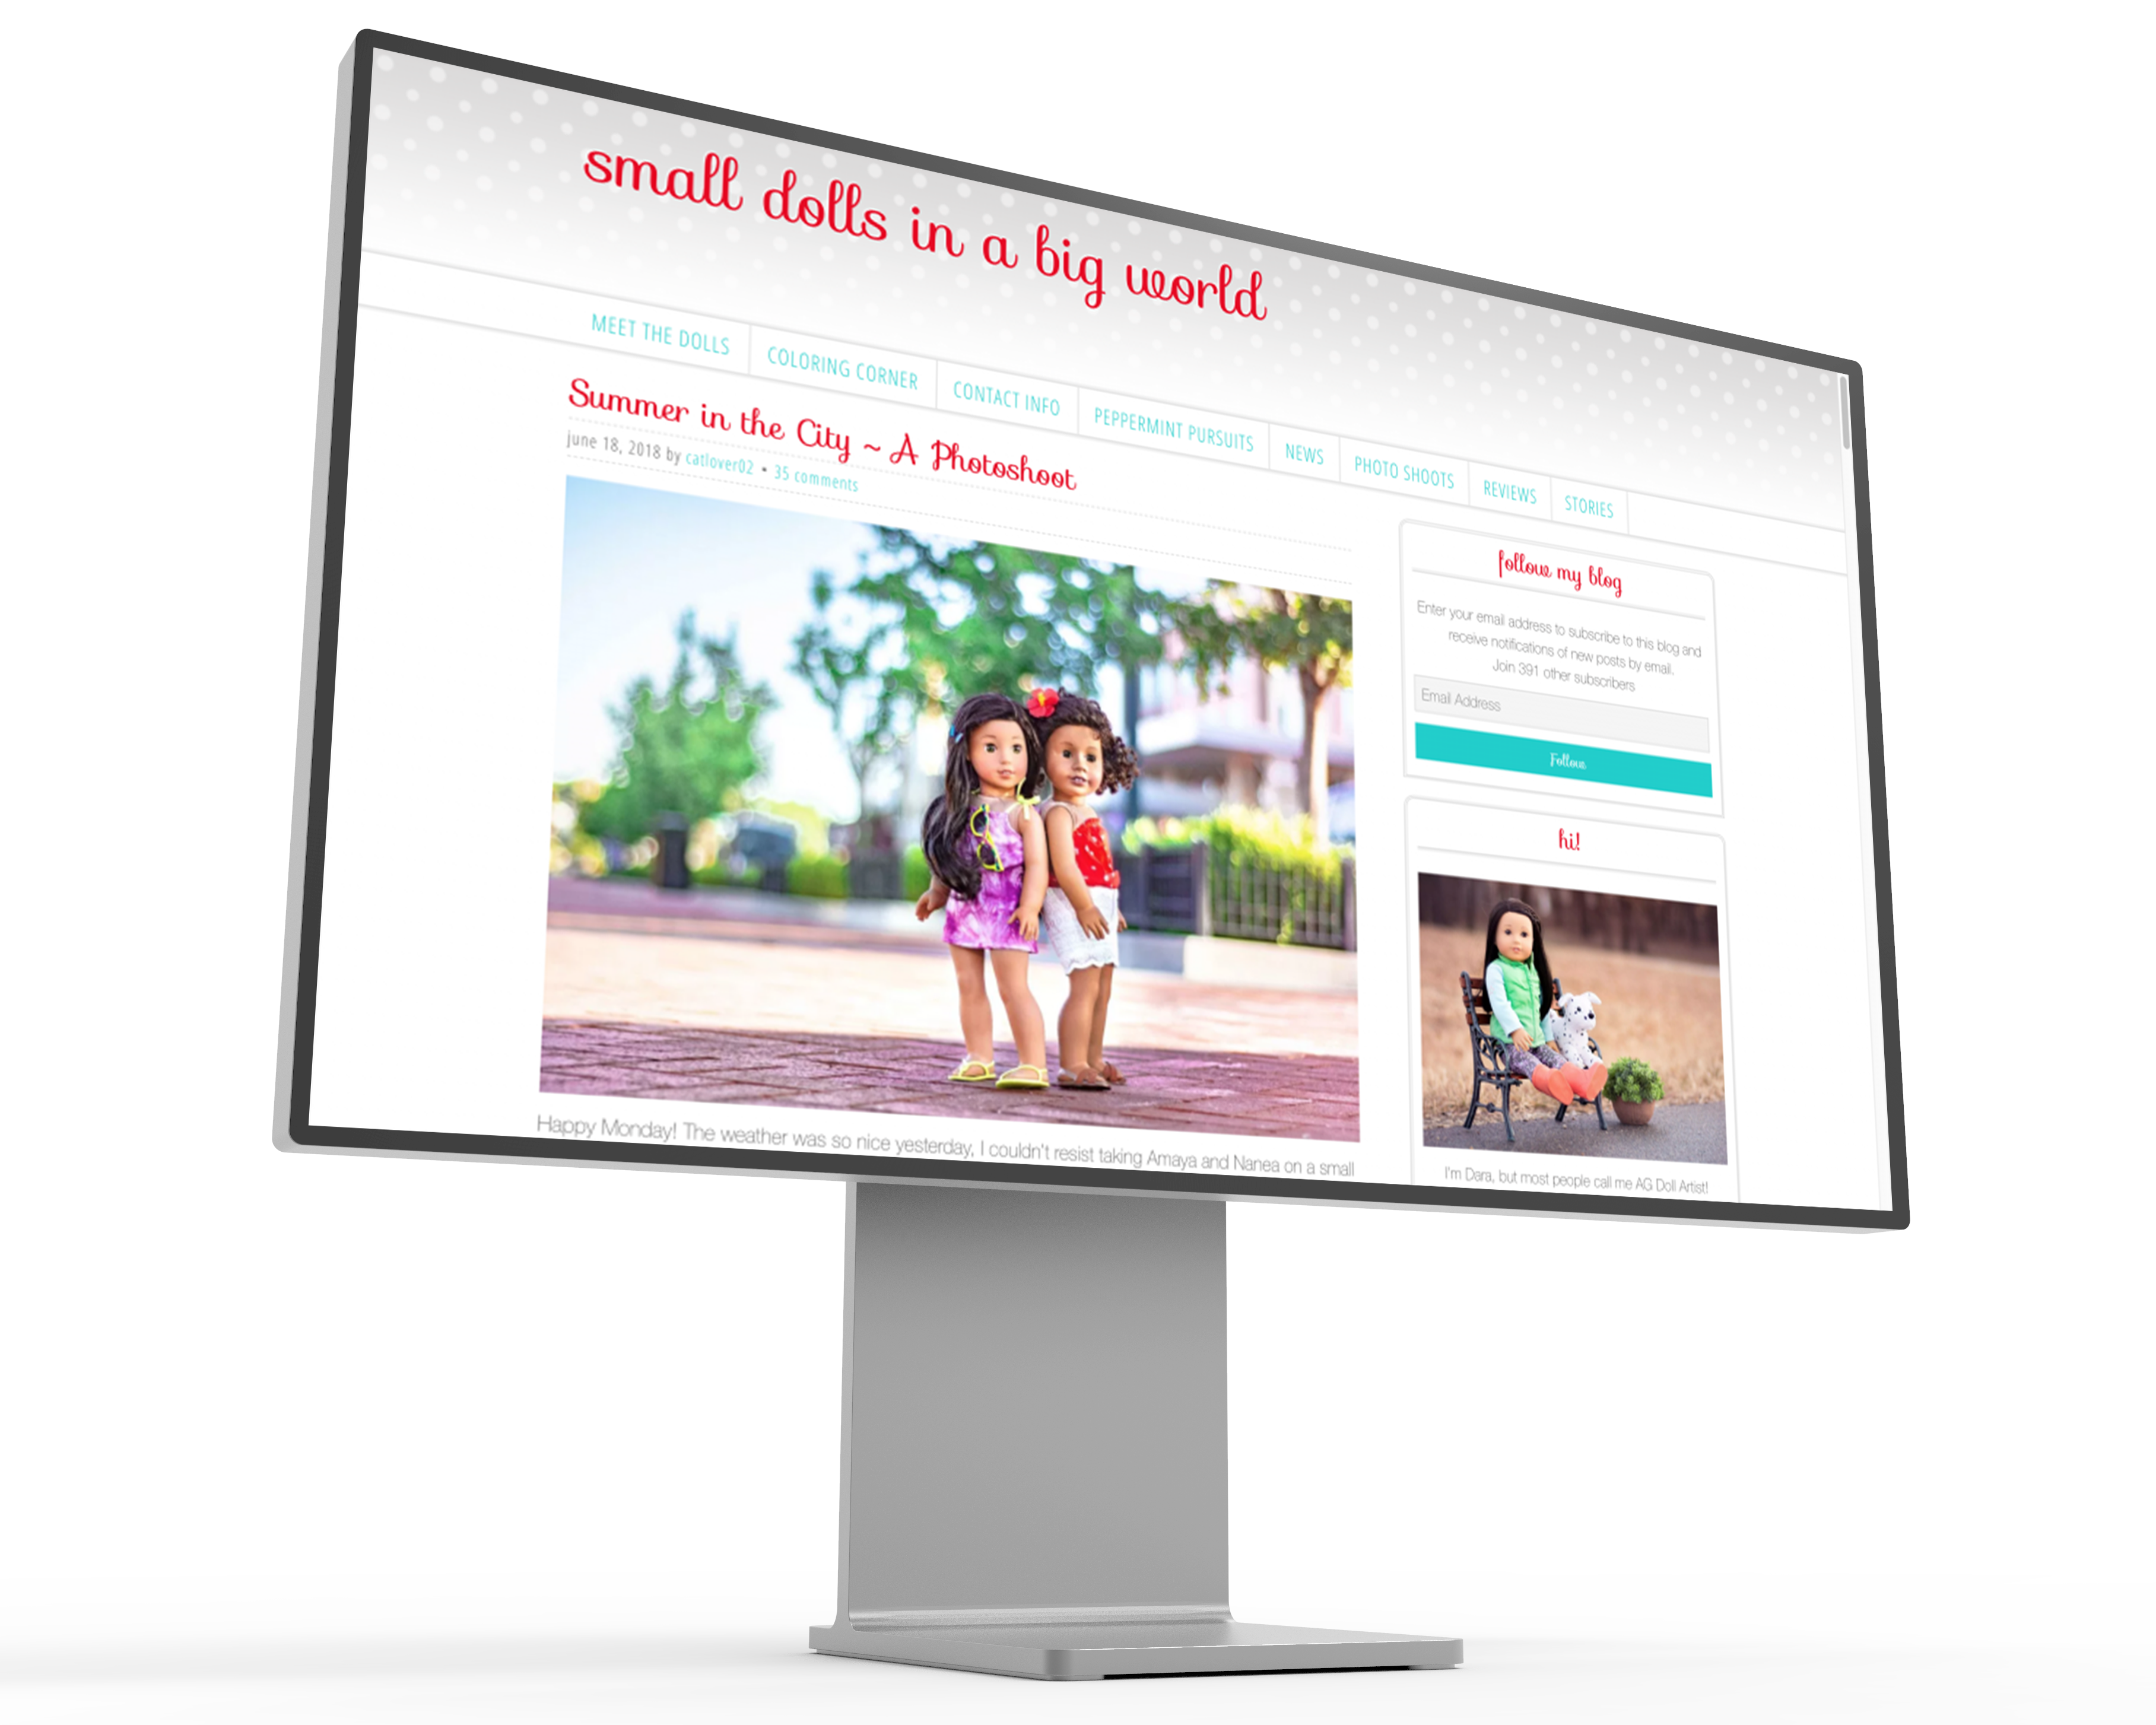 Image of the Small Dolls in a Big World website displayed on a mockup of a Pro XDR Display. 